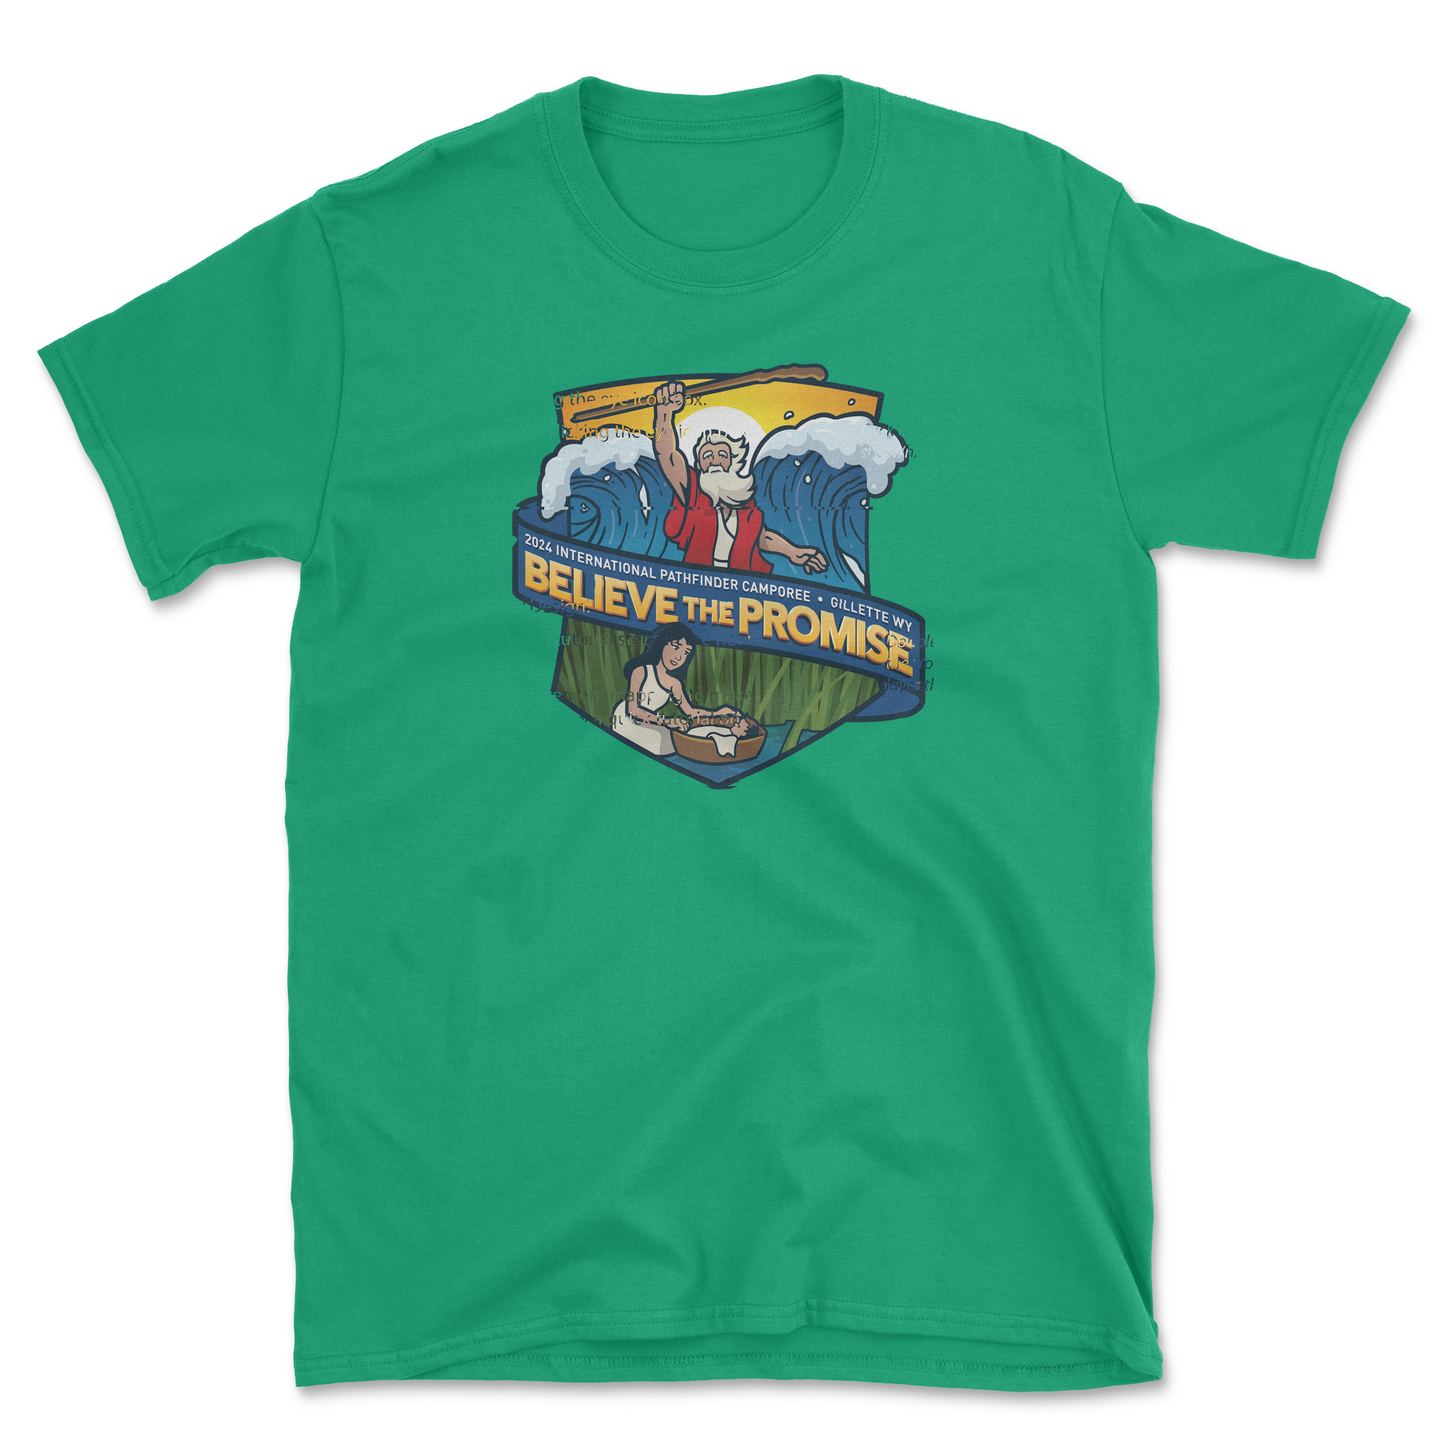 Believe the Promise Camporee T-shirt